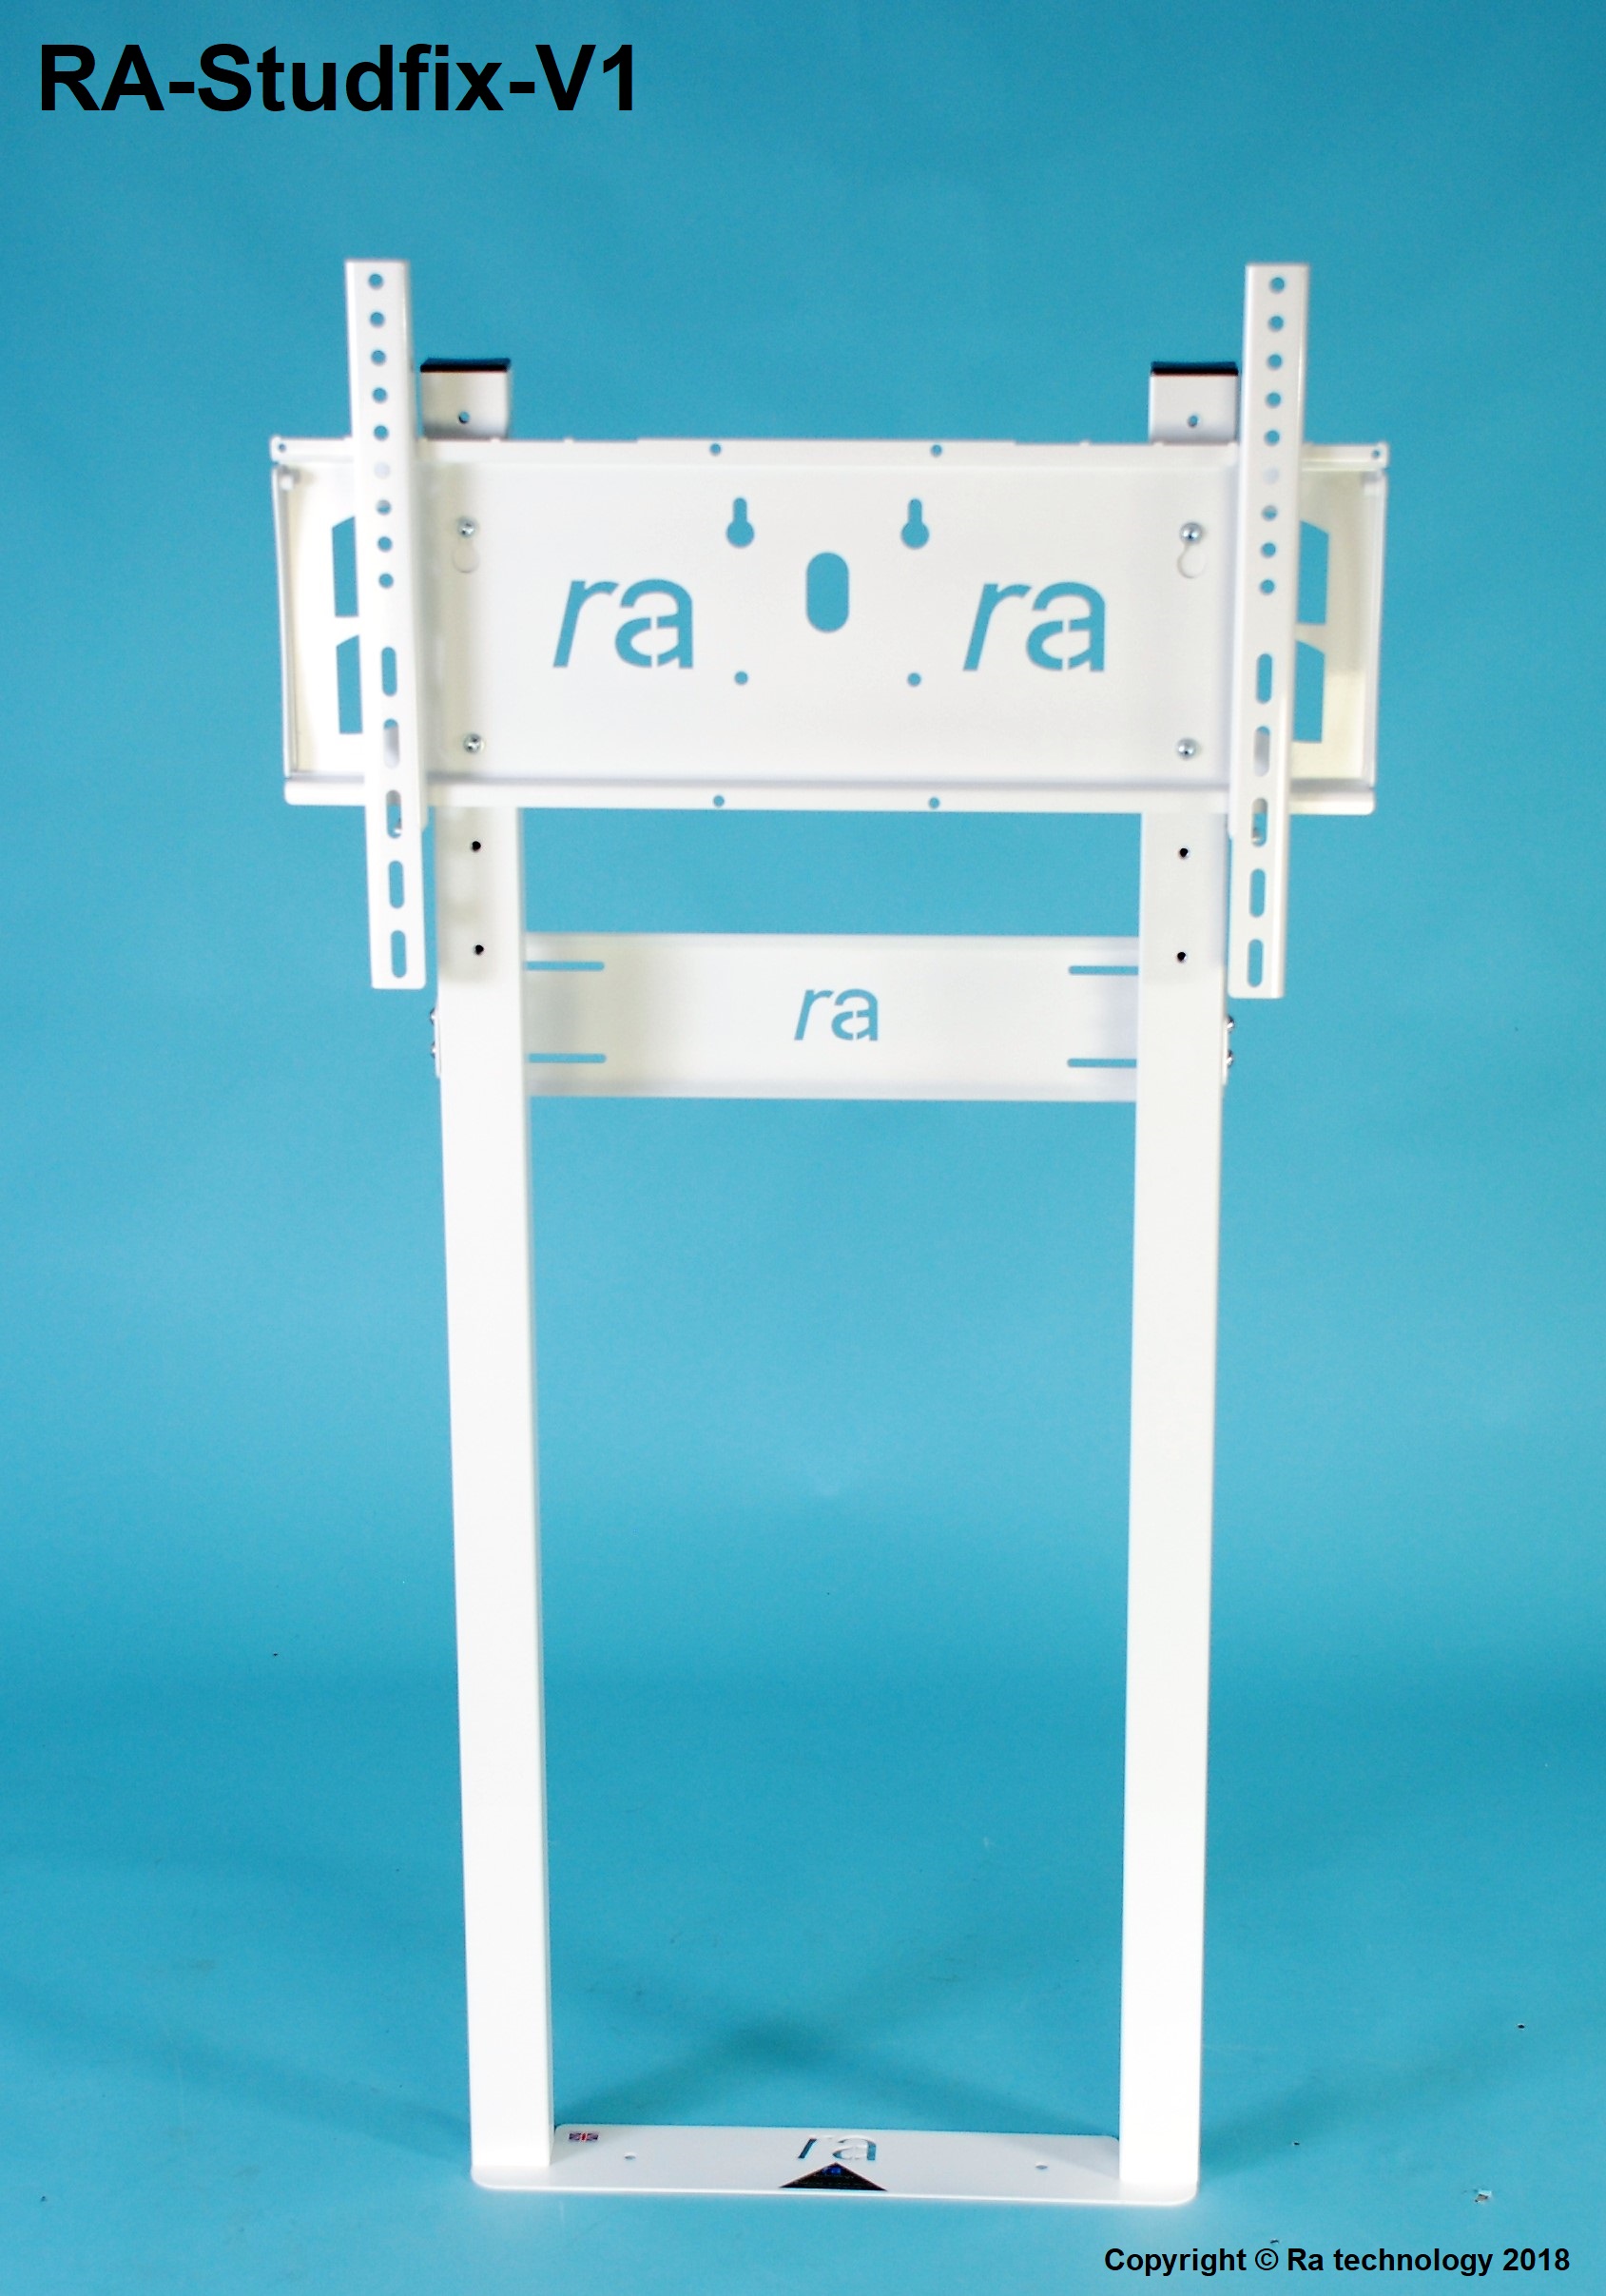 RA-Studfix-V1-LL Wall to Floor Mount for Flat Screens up to 65kg